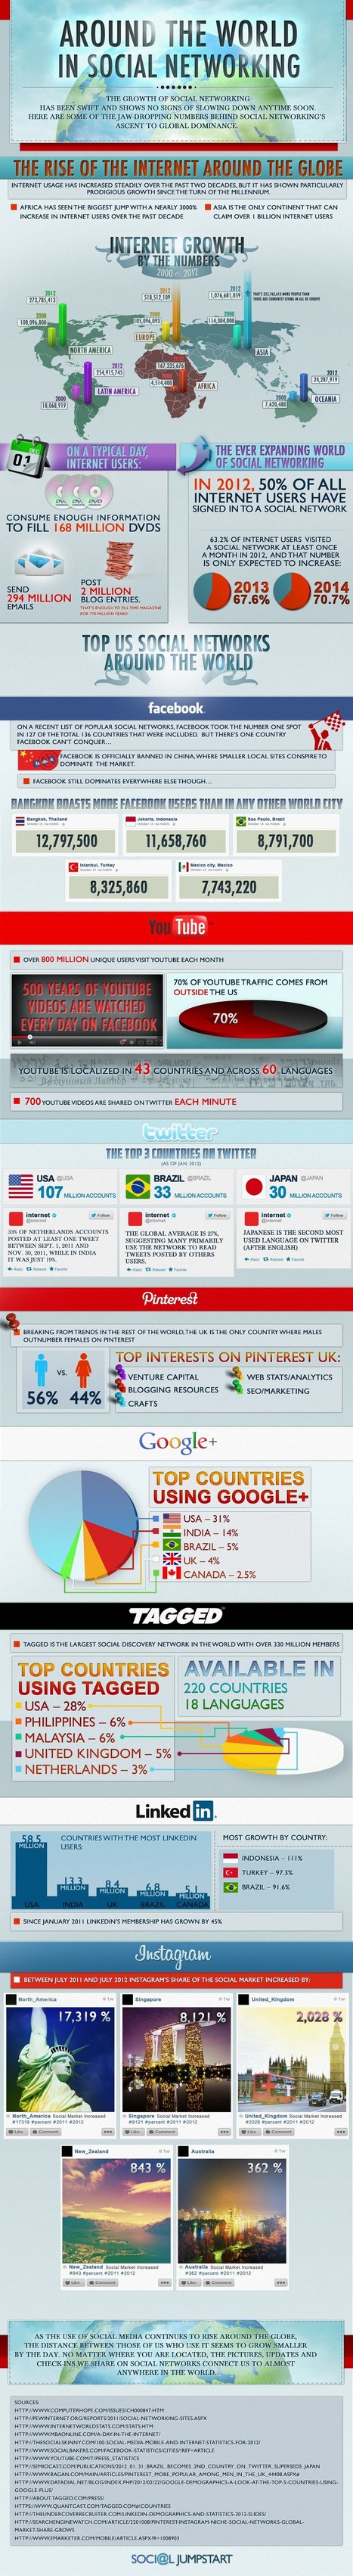 Social Media Around the World: A Complete Infographic Guide | A New Society, a new education! | Scoop.it